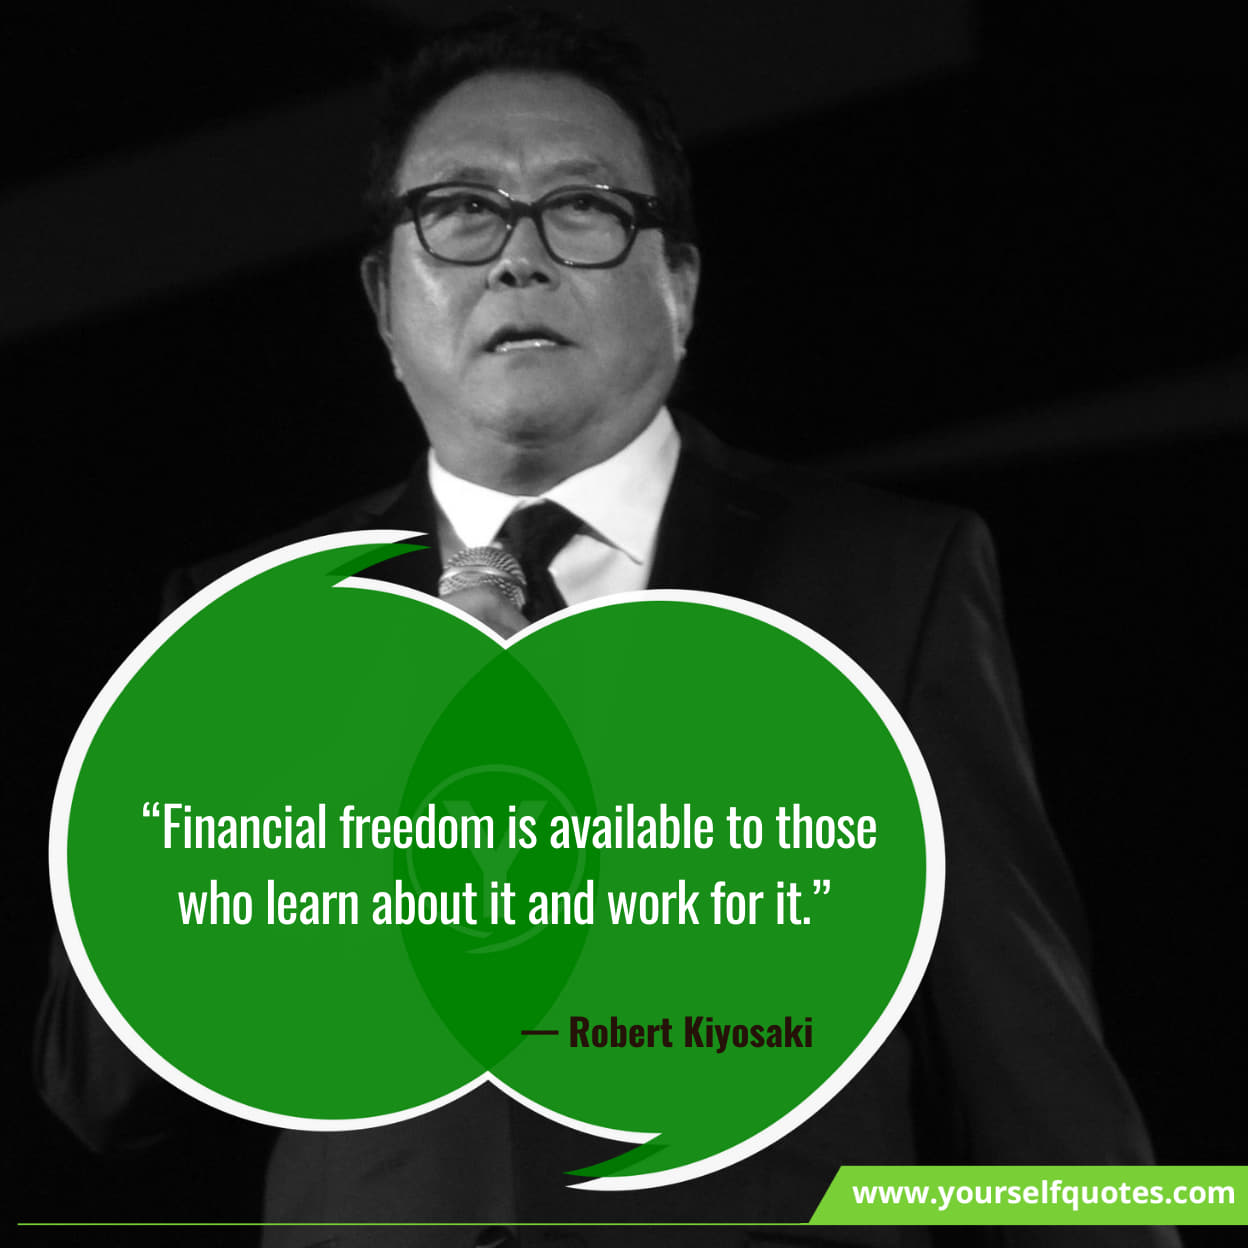 Finance Quotes About Financial Freedom